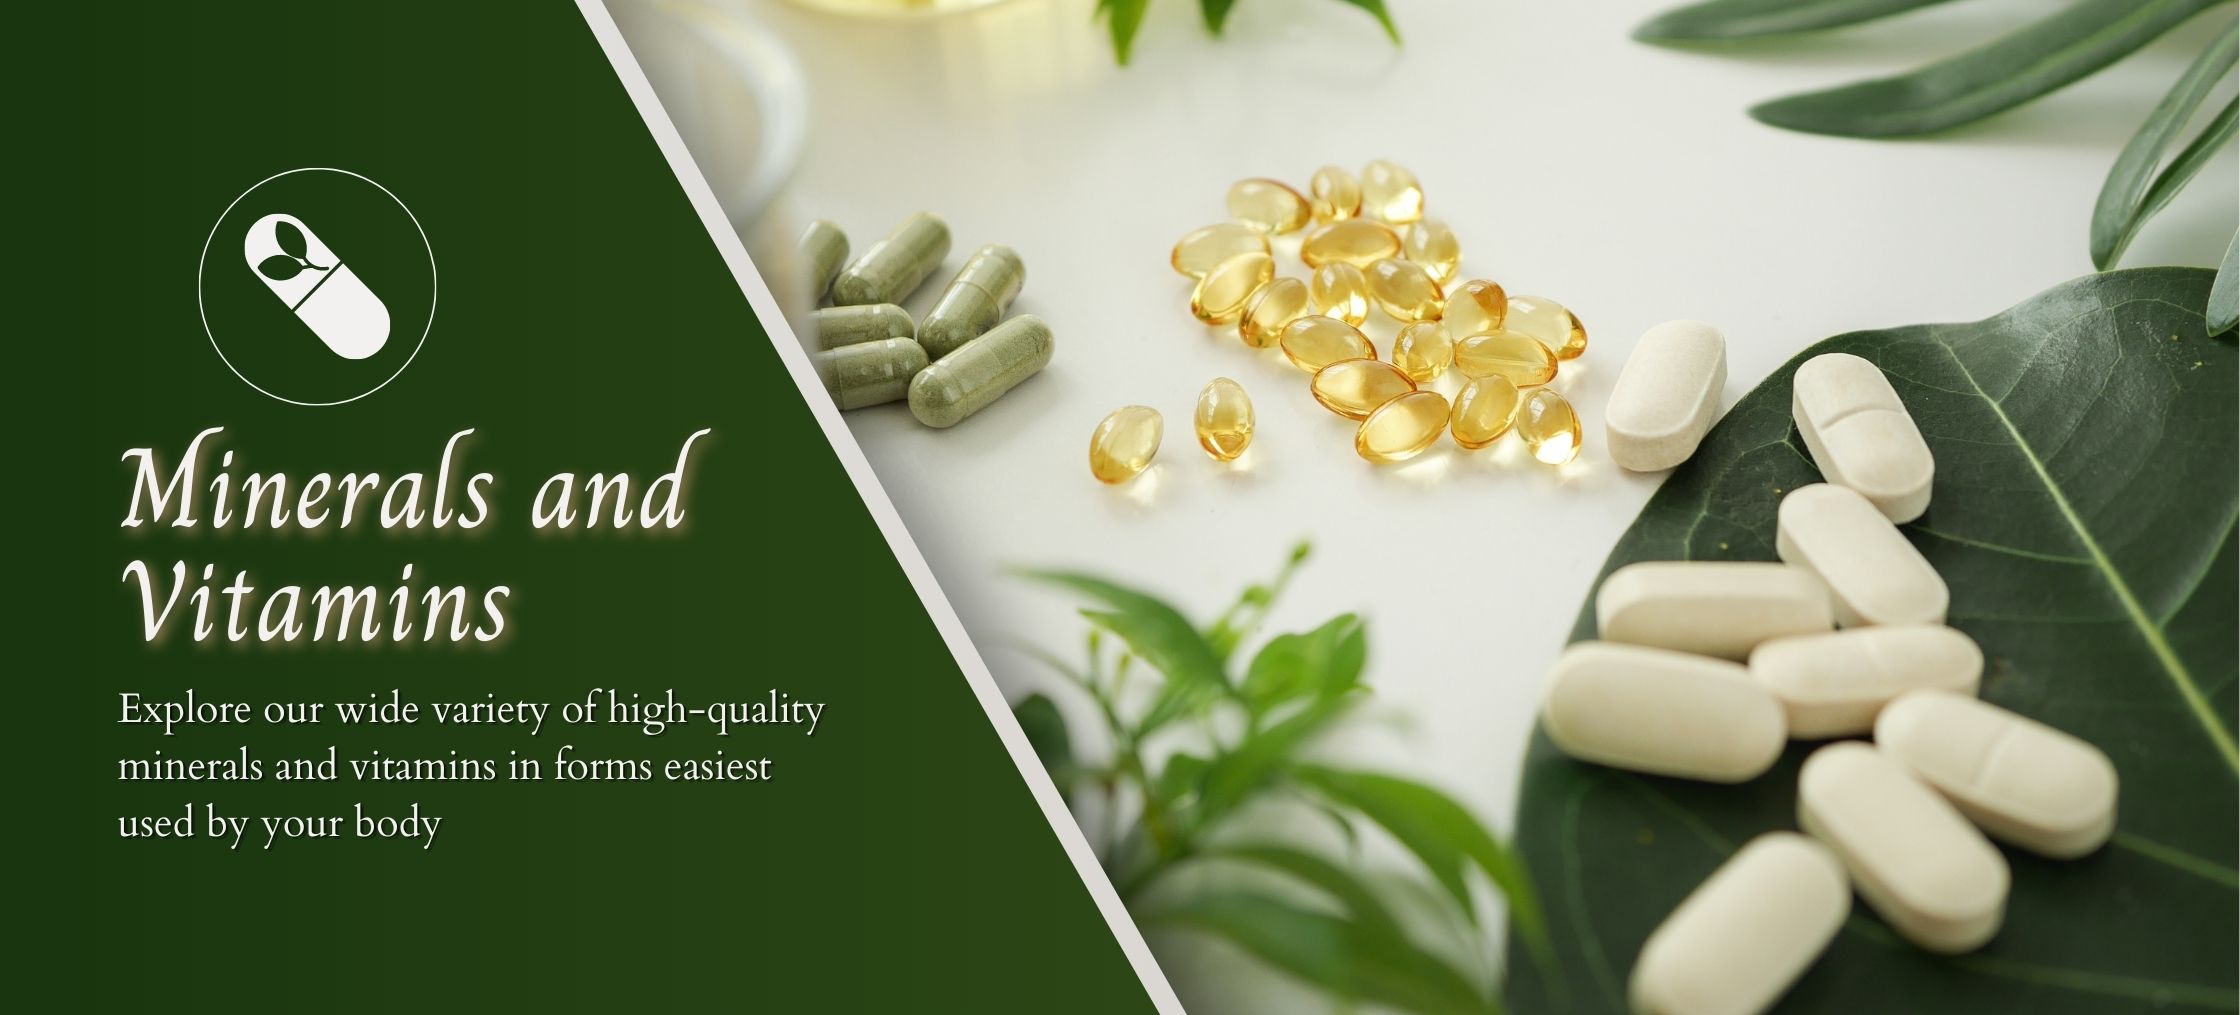 Minerals and vitamins banner